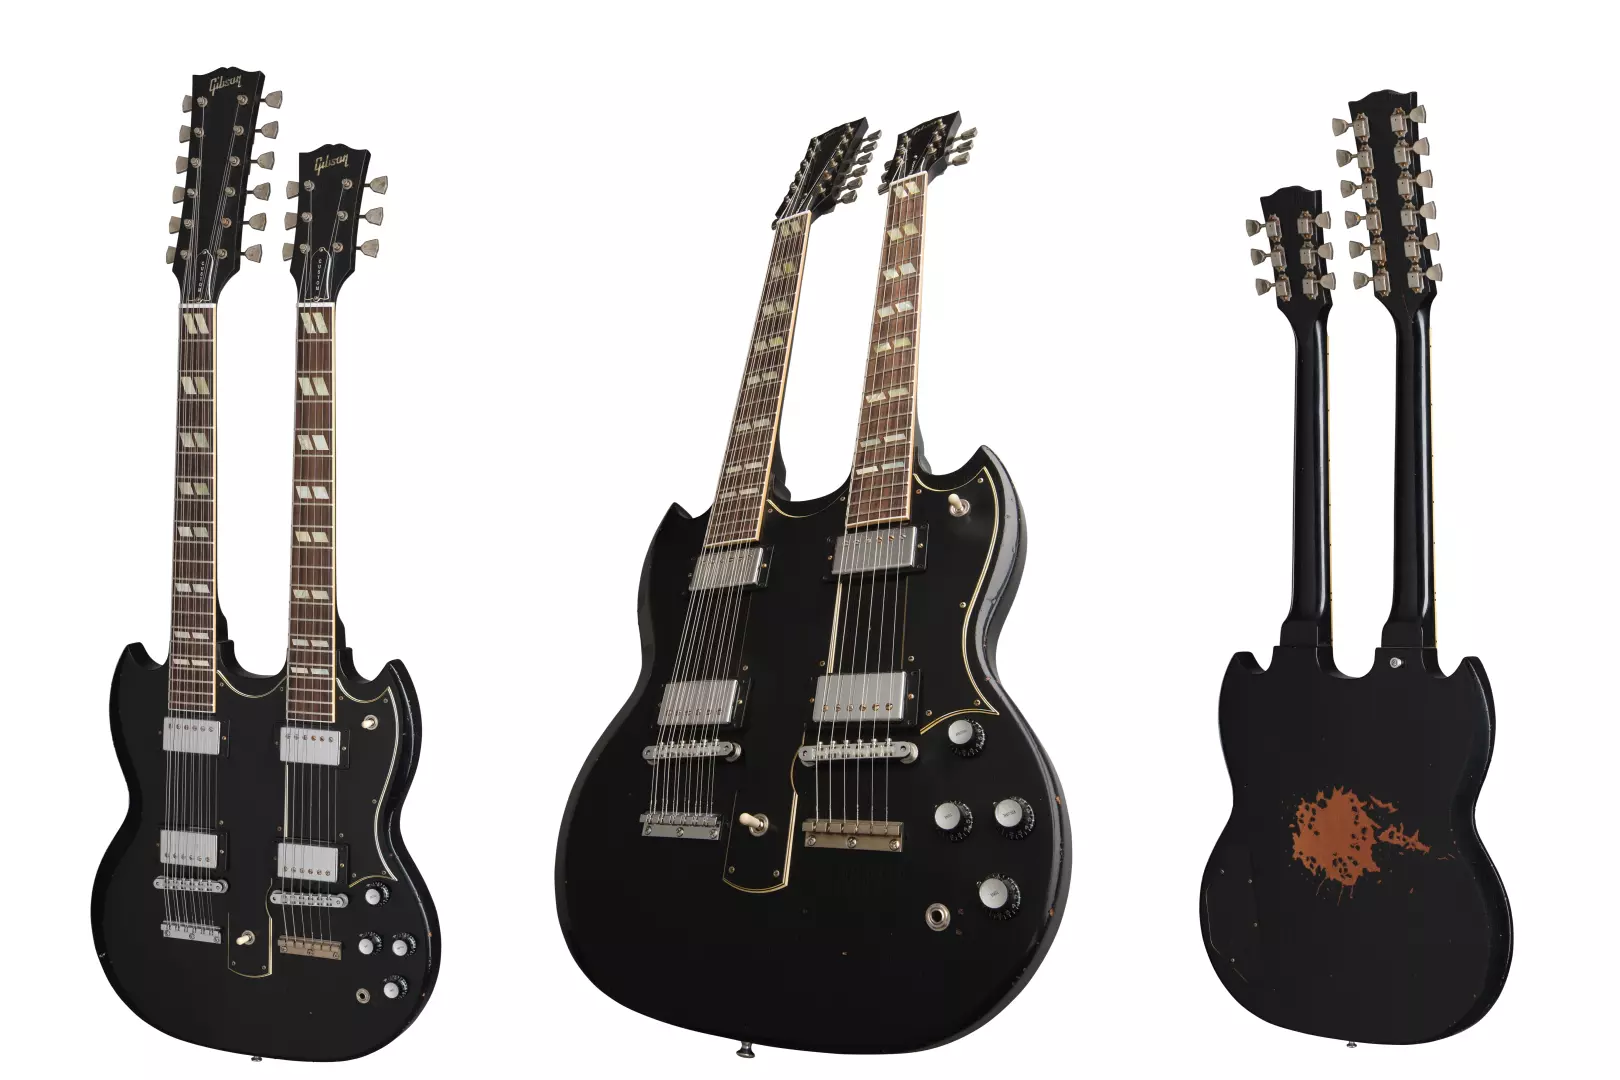 The Slash Signature Gibson Double Neck Guitar Is Here